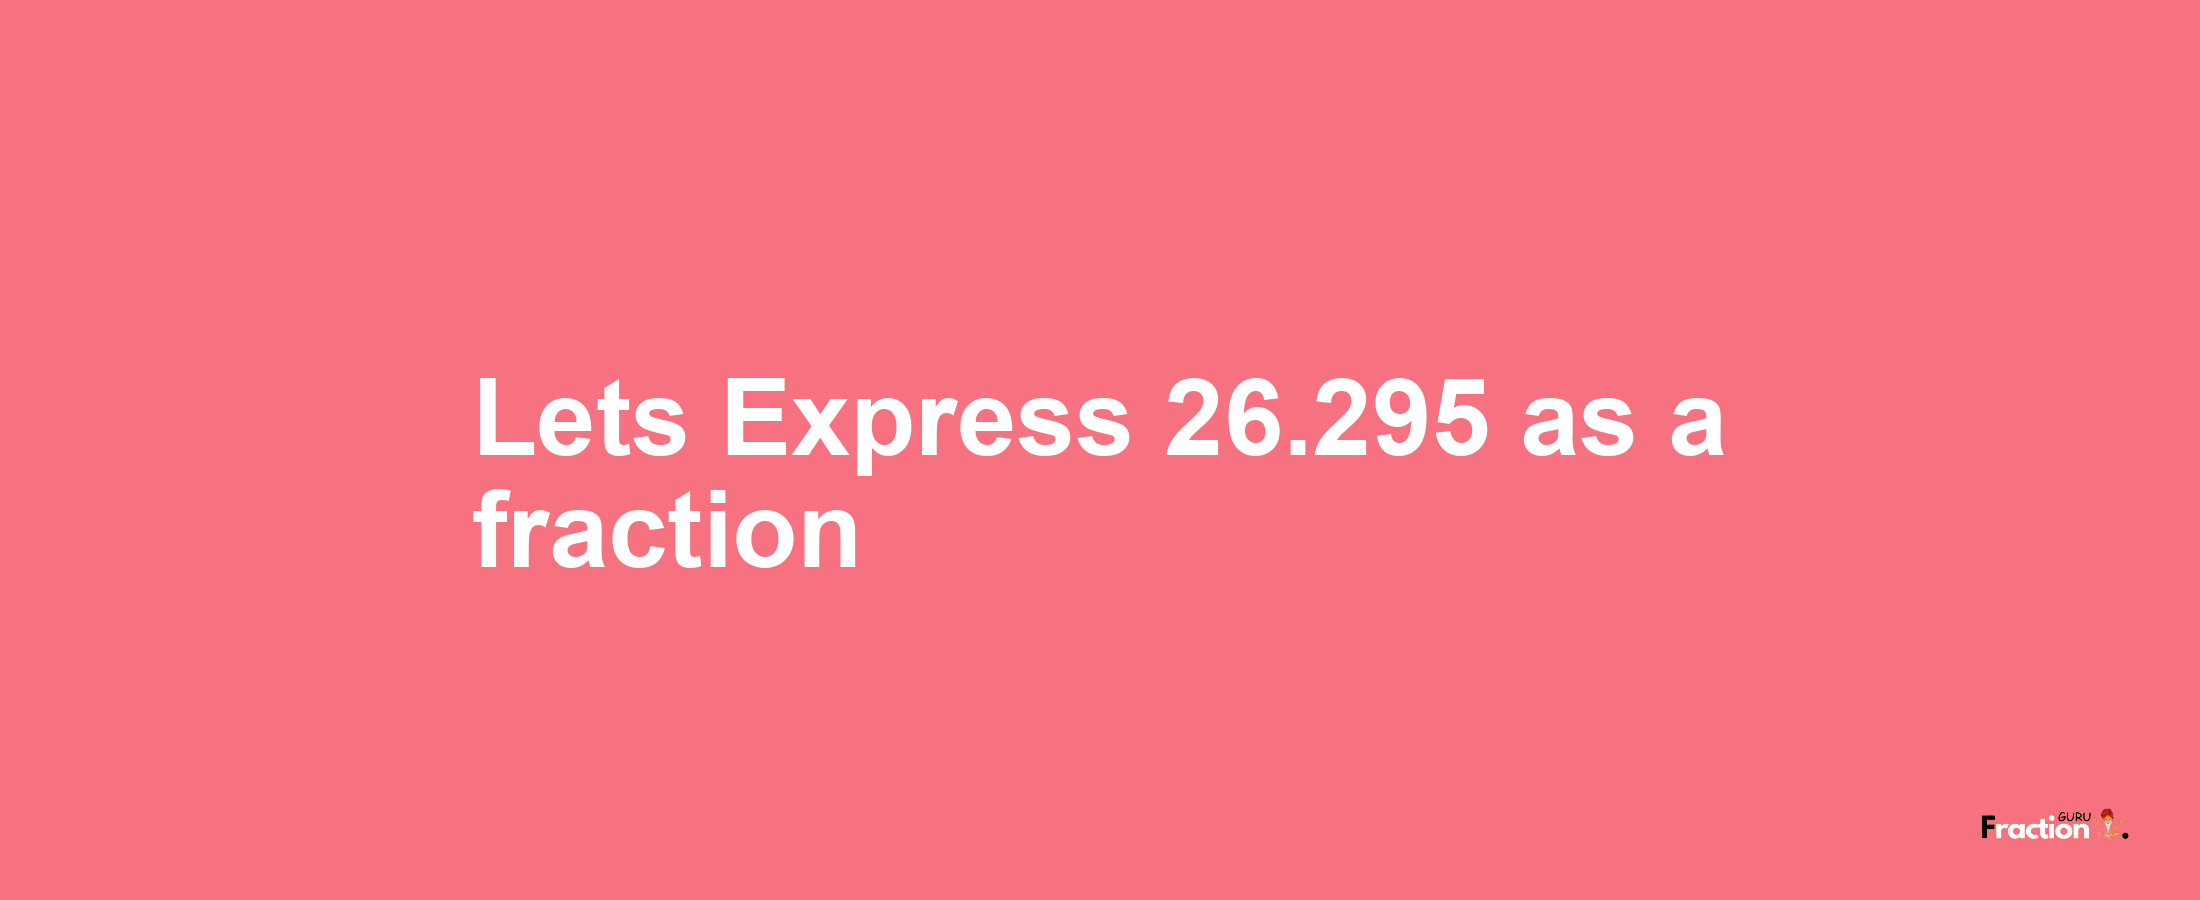 Lets Express 26.295 as afraction